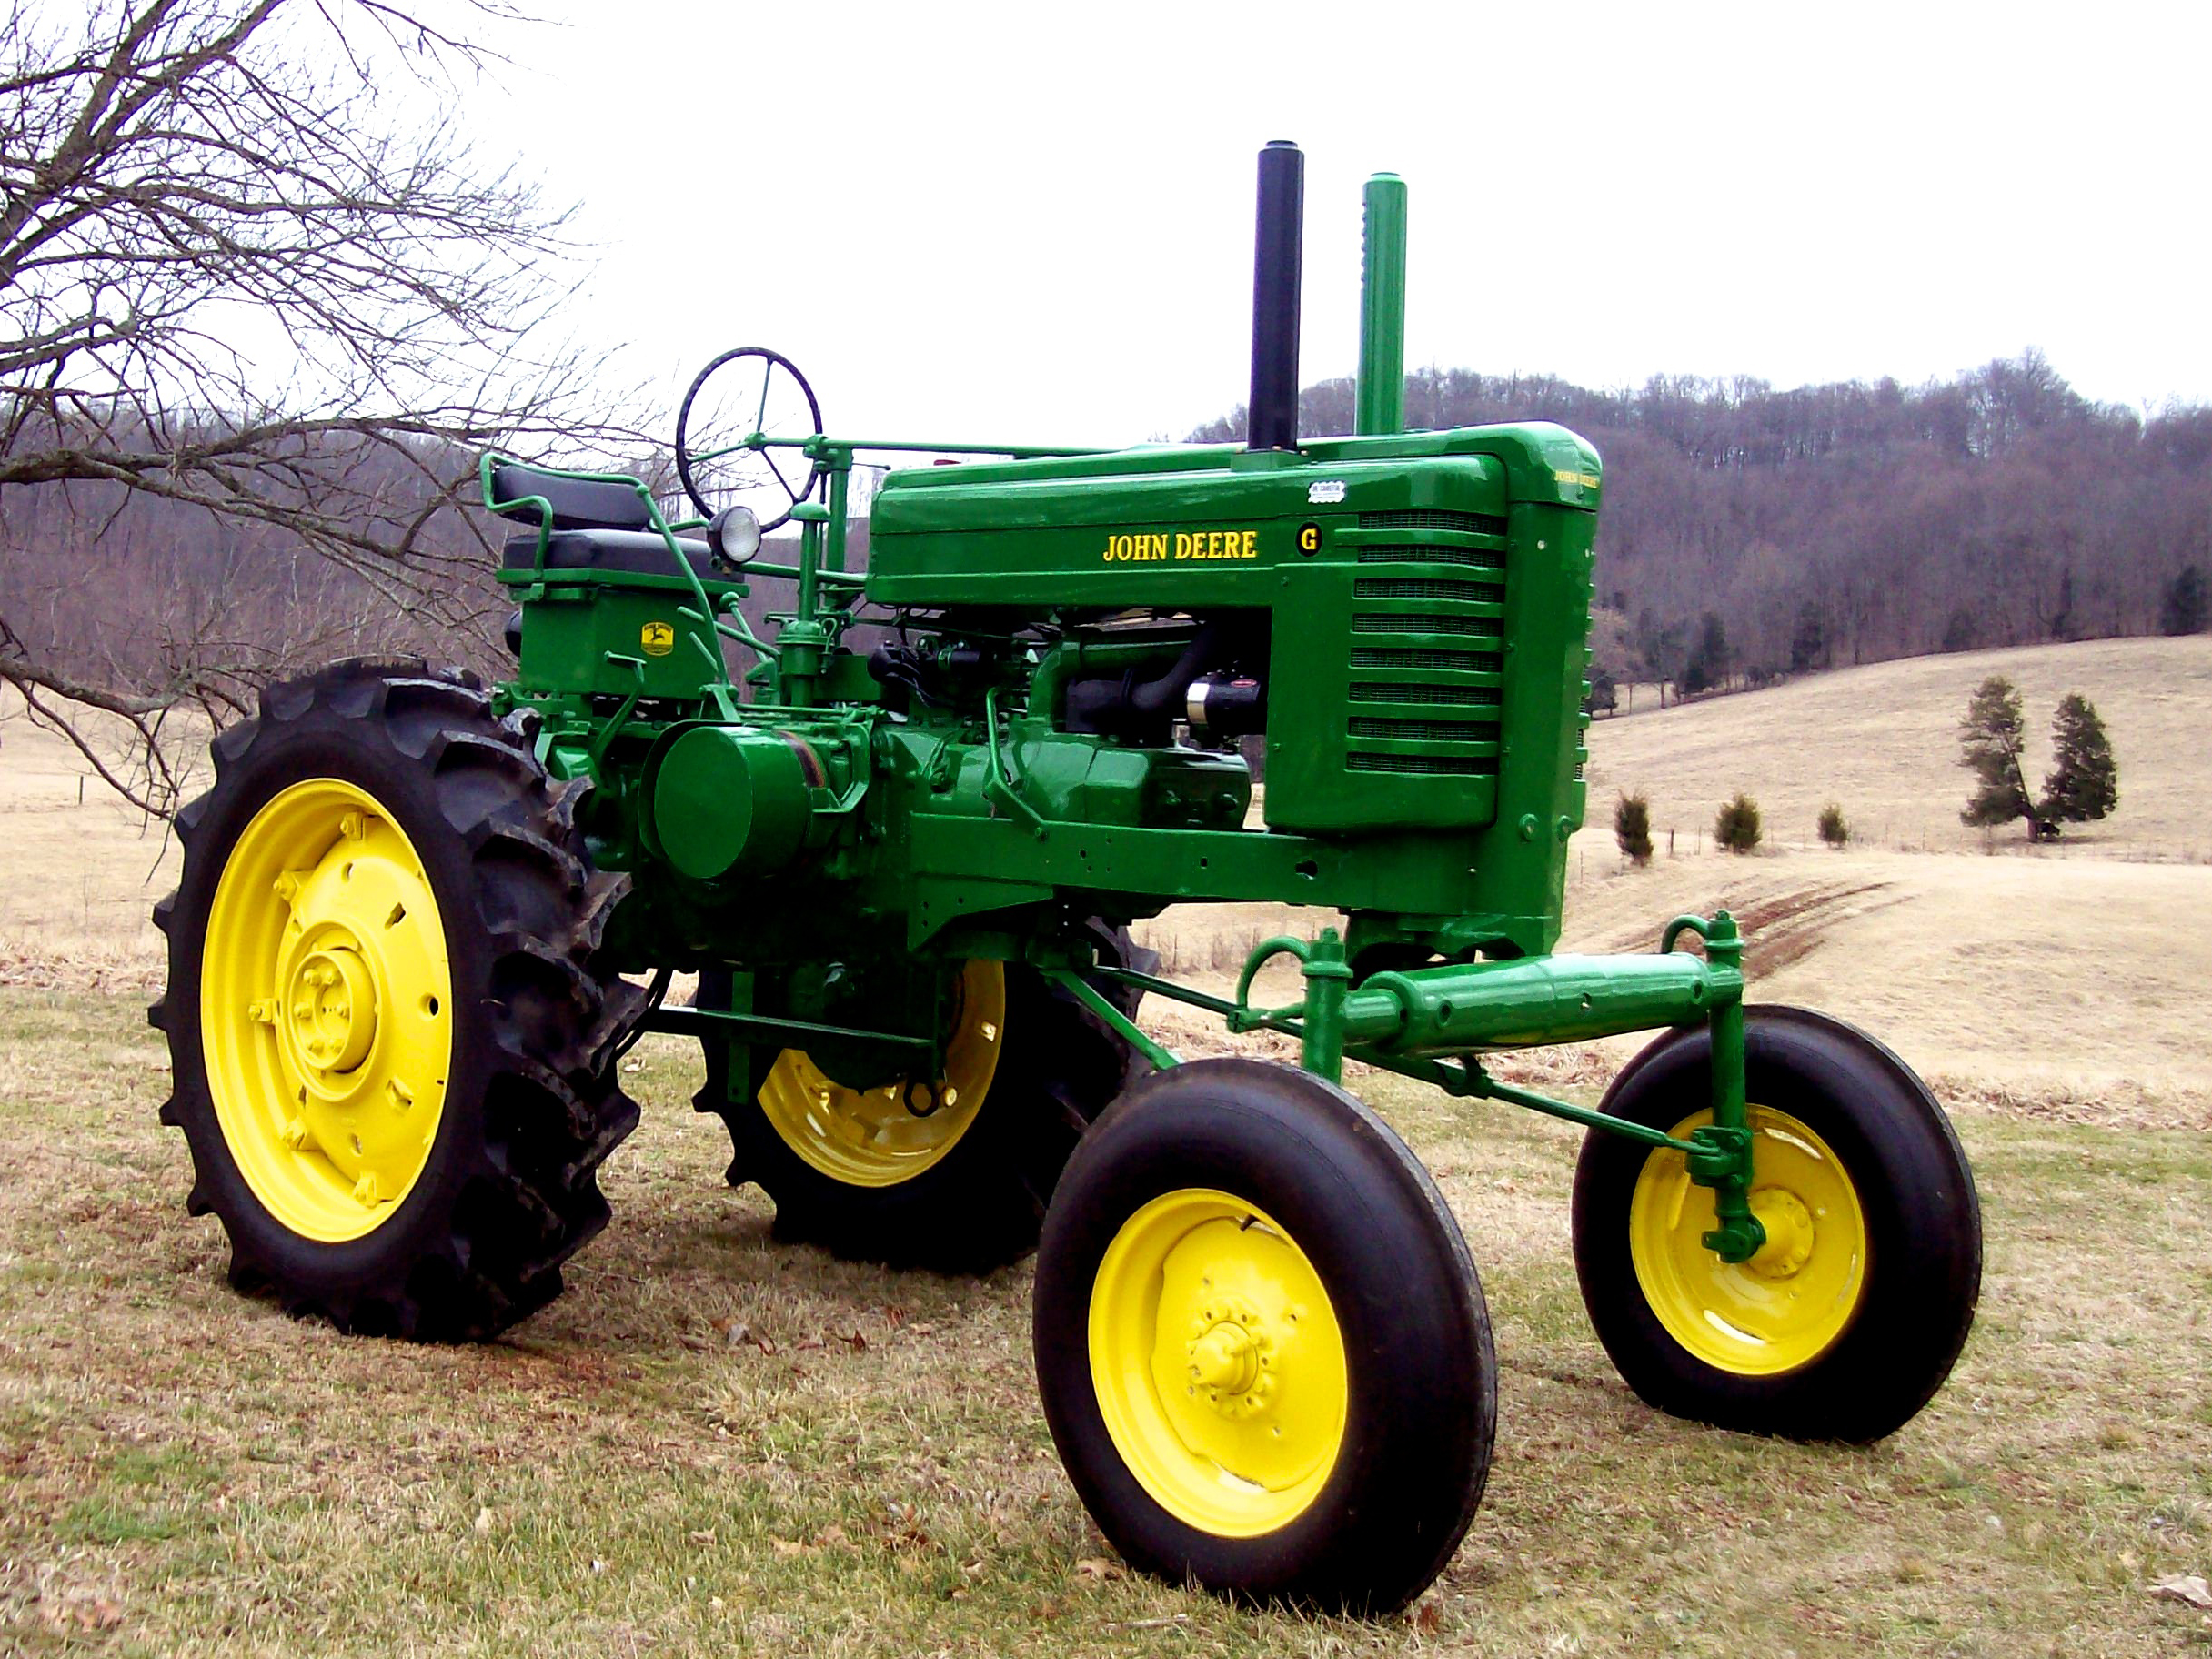 Mecum’s Vintage Tractor Auction To Offer Stellar Lineup In 